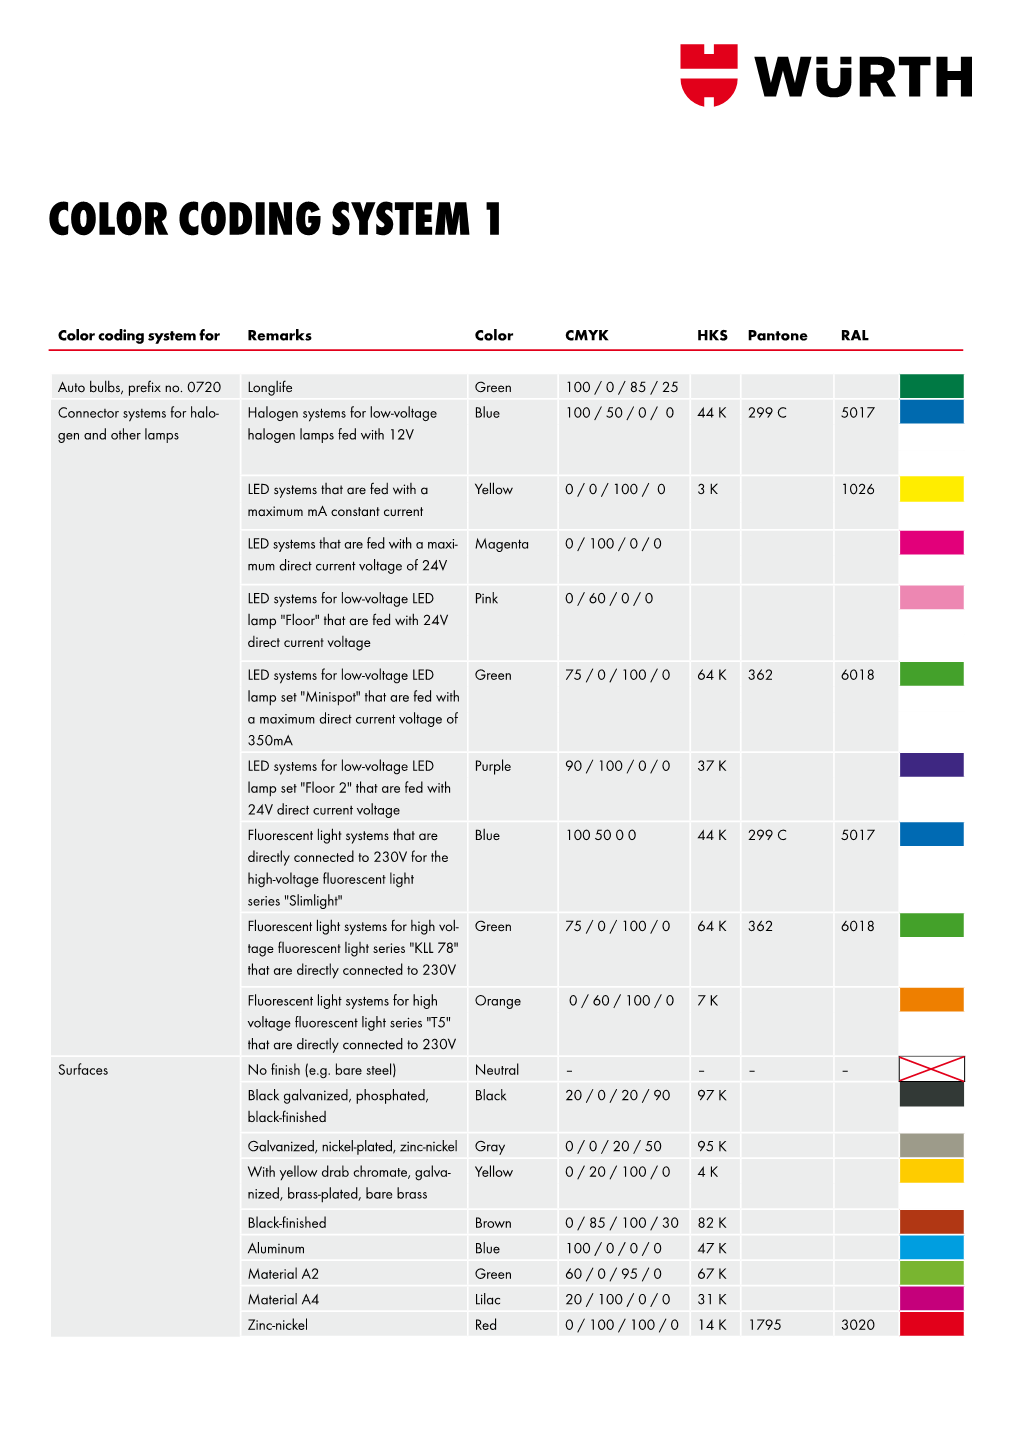 Color Coding System 12 RAL in Pantone and HKS